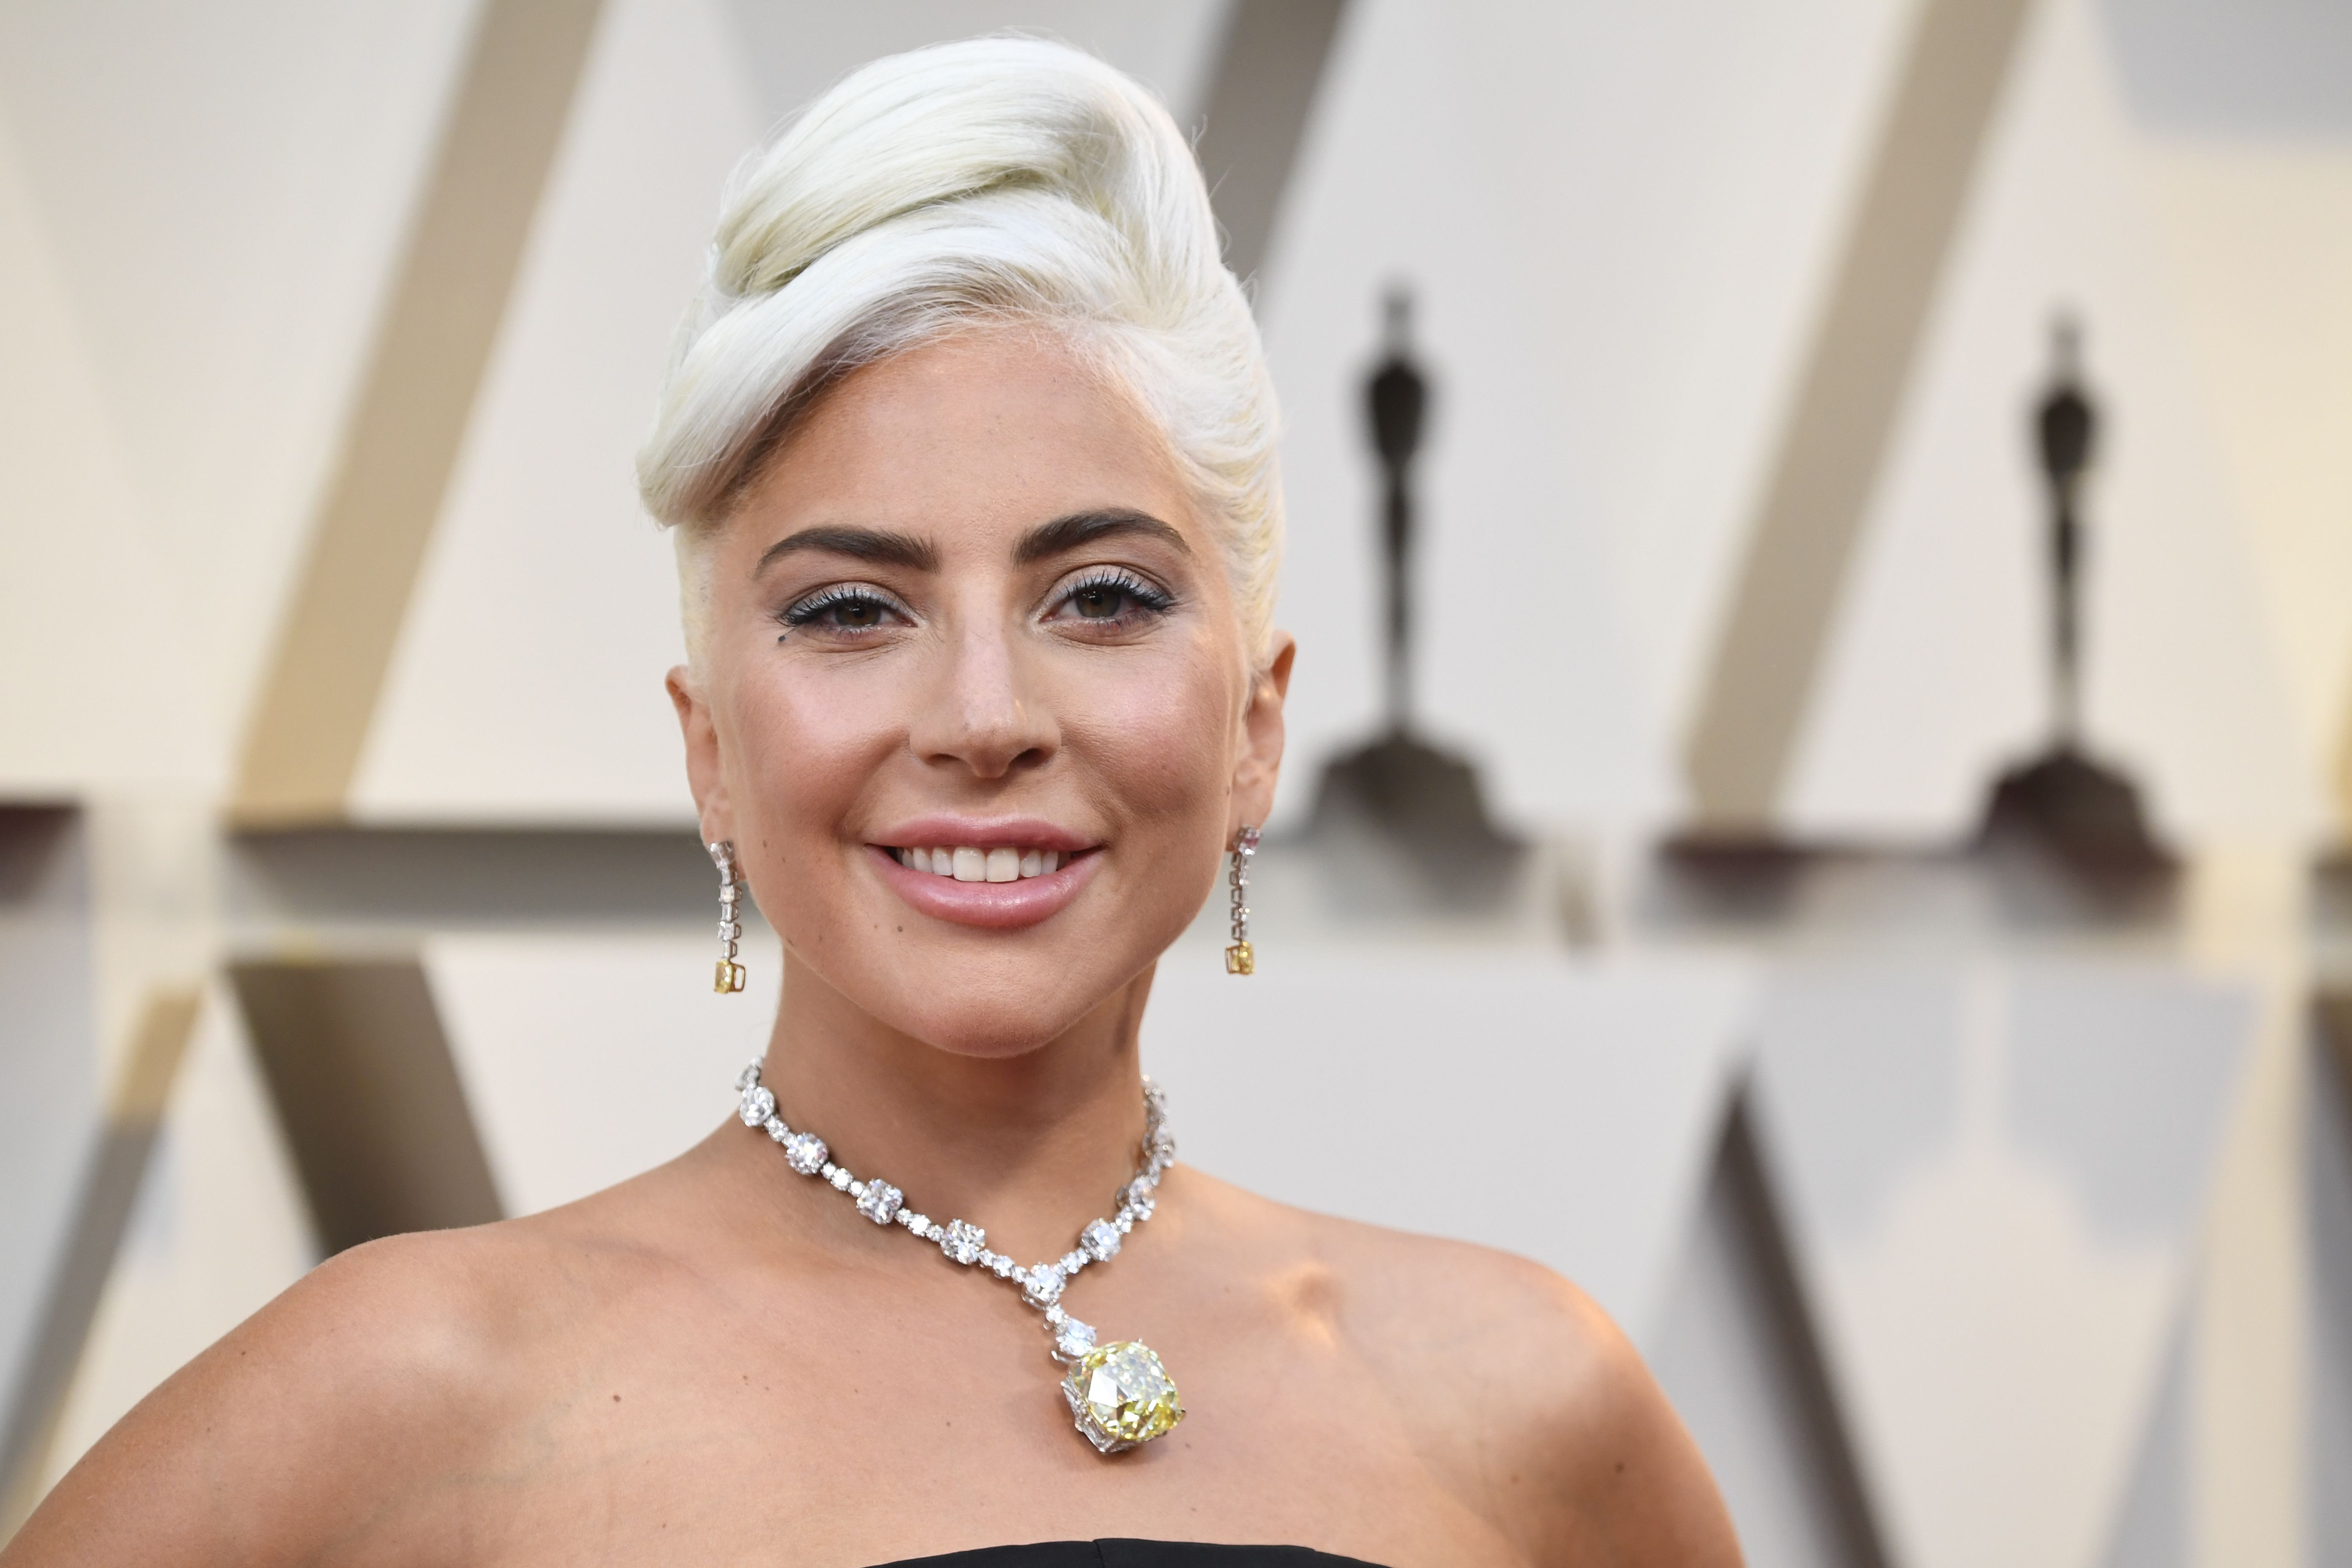 Lady Gaga attends the 91st Annual Academy Awards at Hollywood and Highland on February 24, 2019 in Hollywood, California | Photo: Getty Images